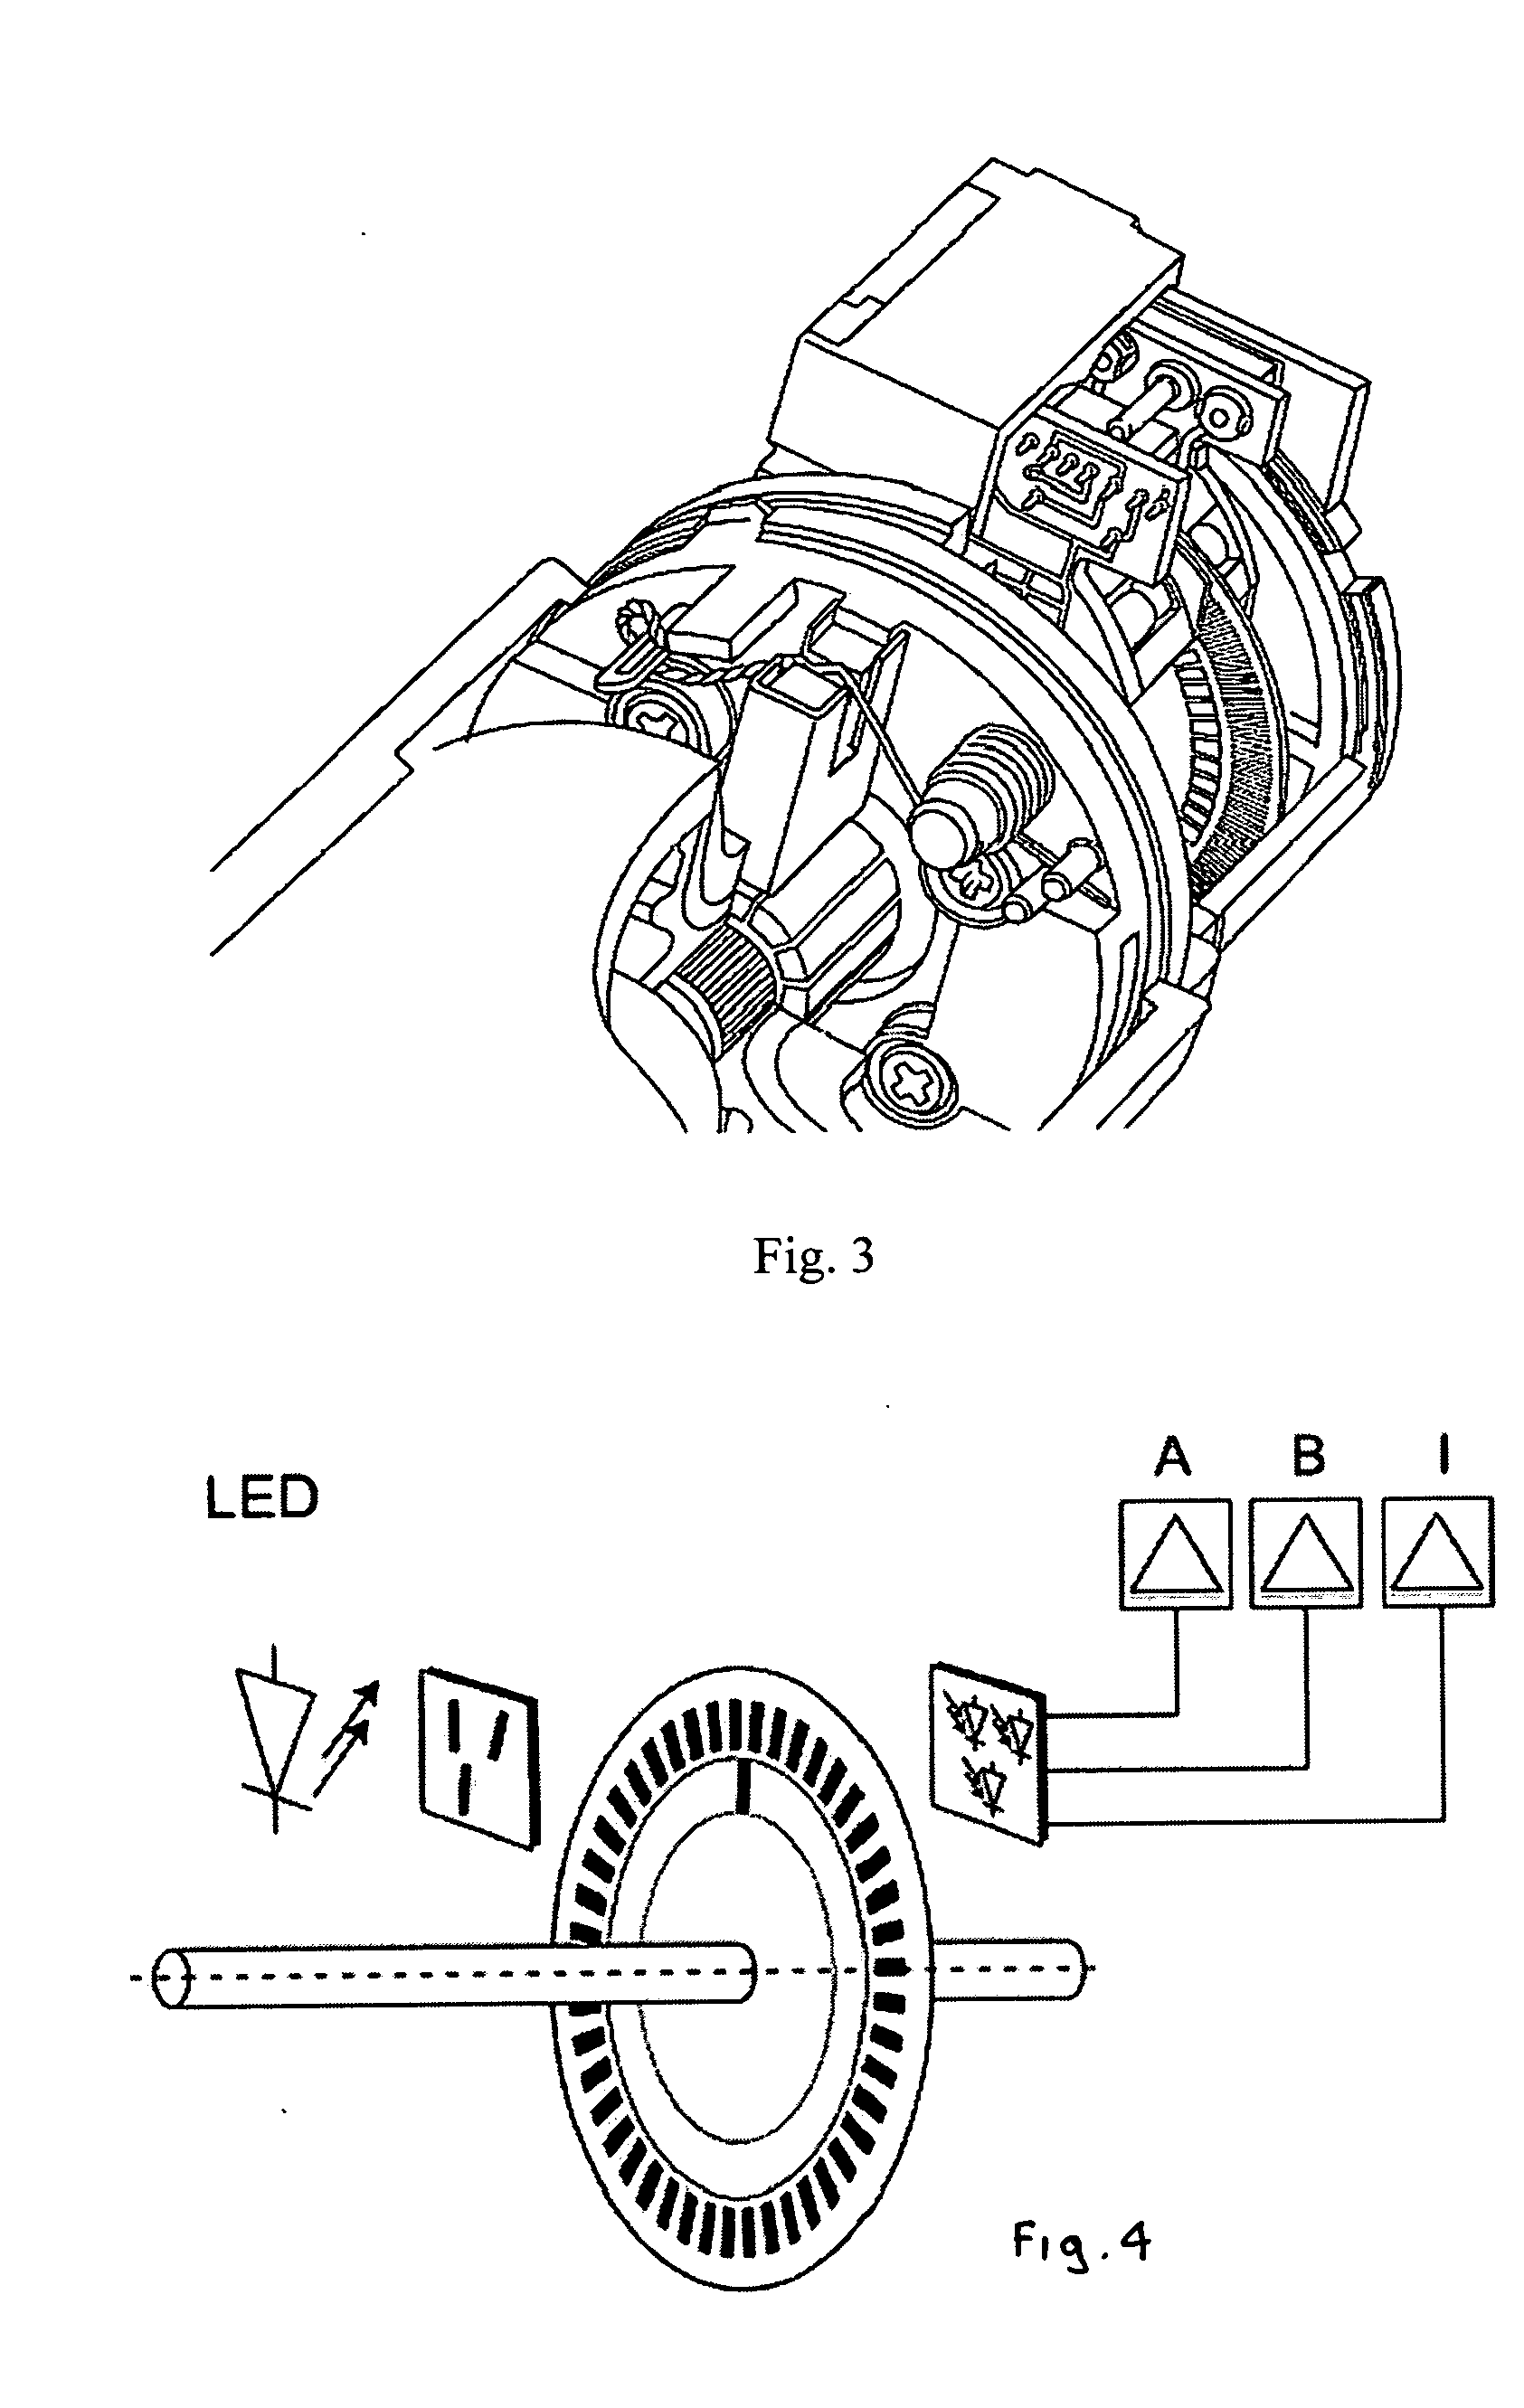 Detecting device for detecting the rotation of a motor rotor